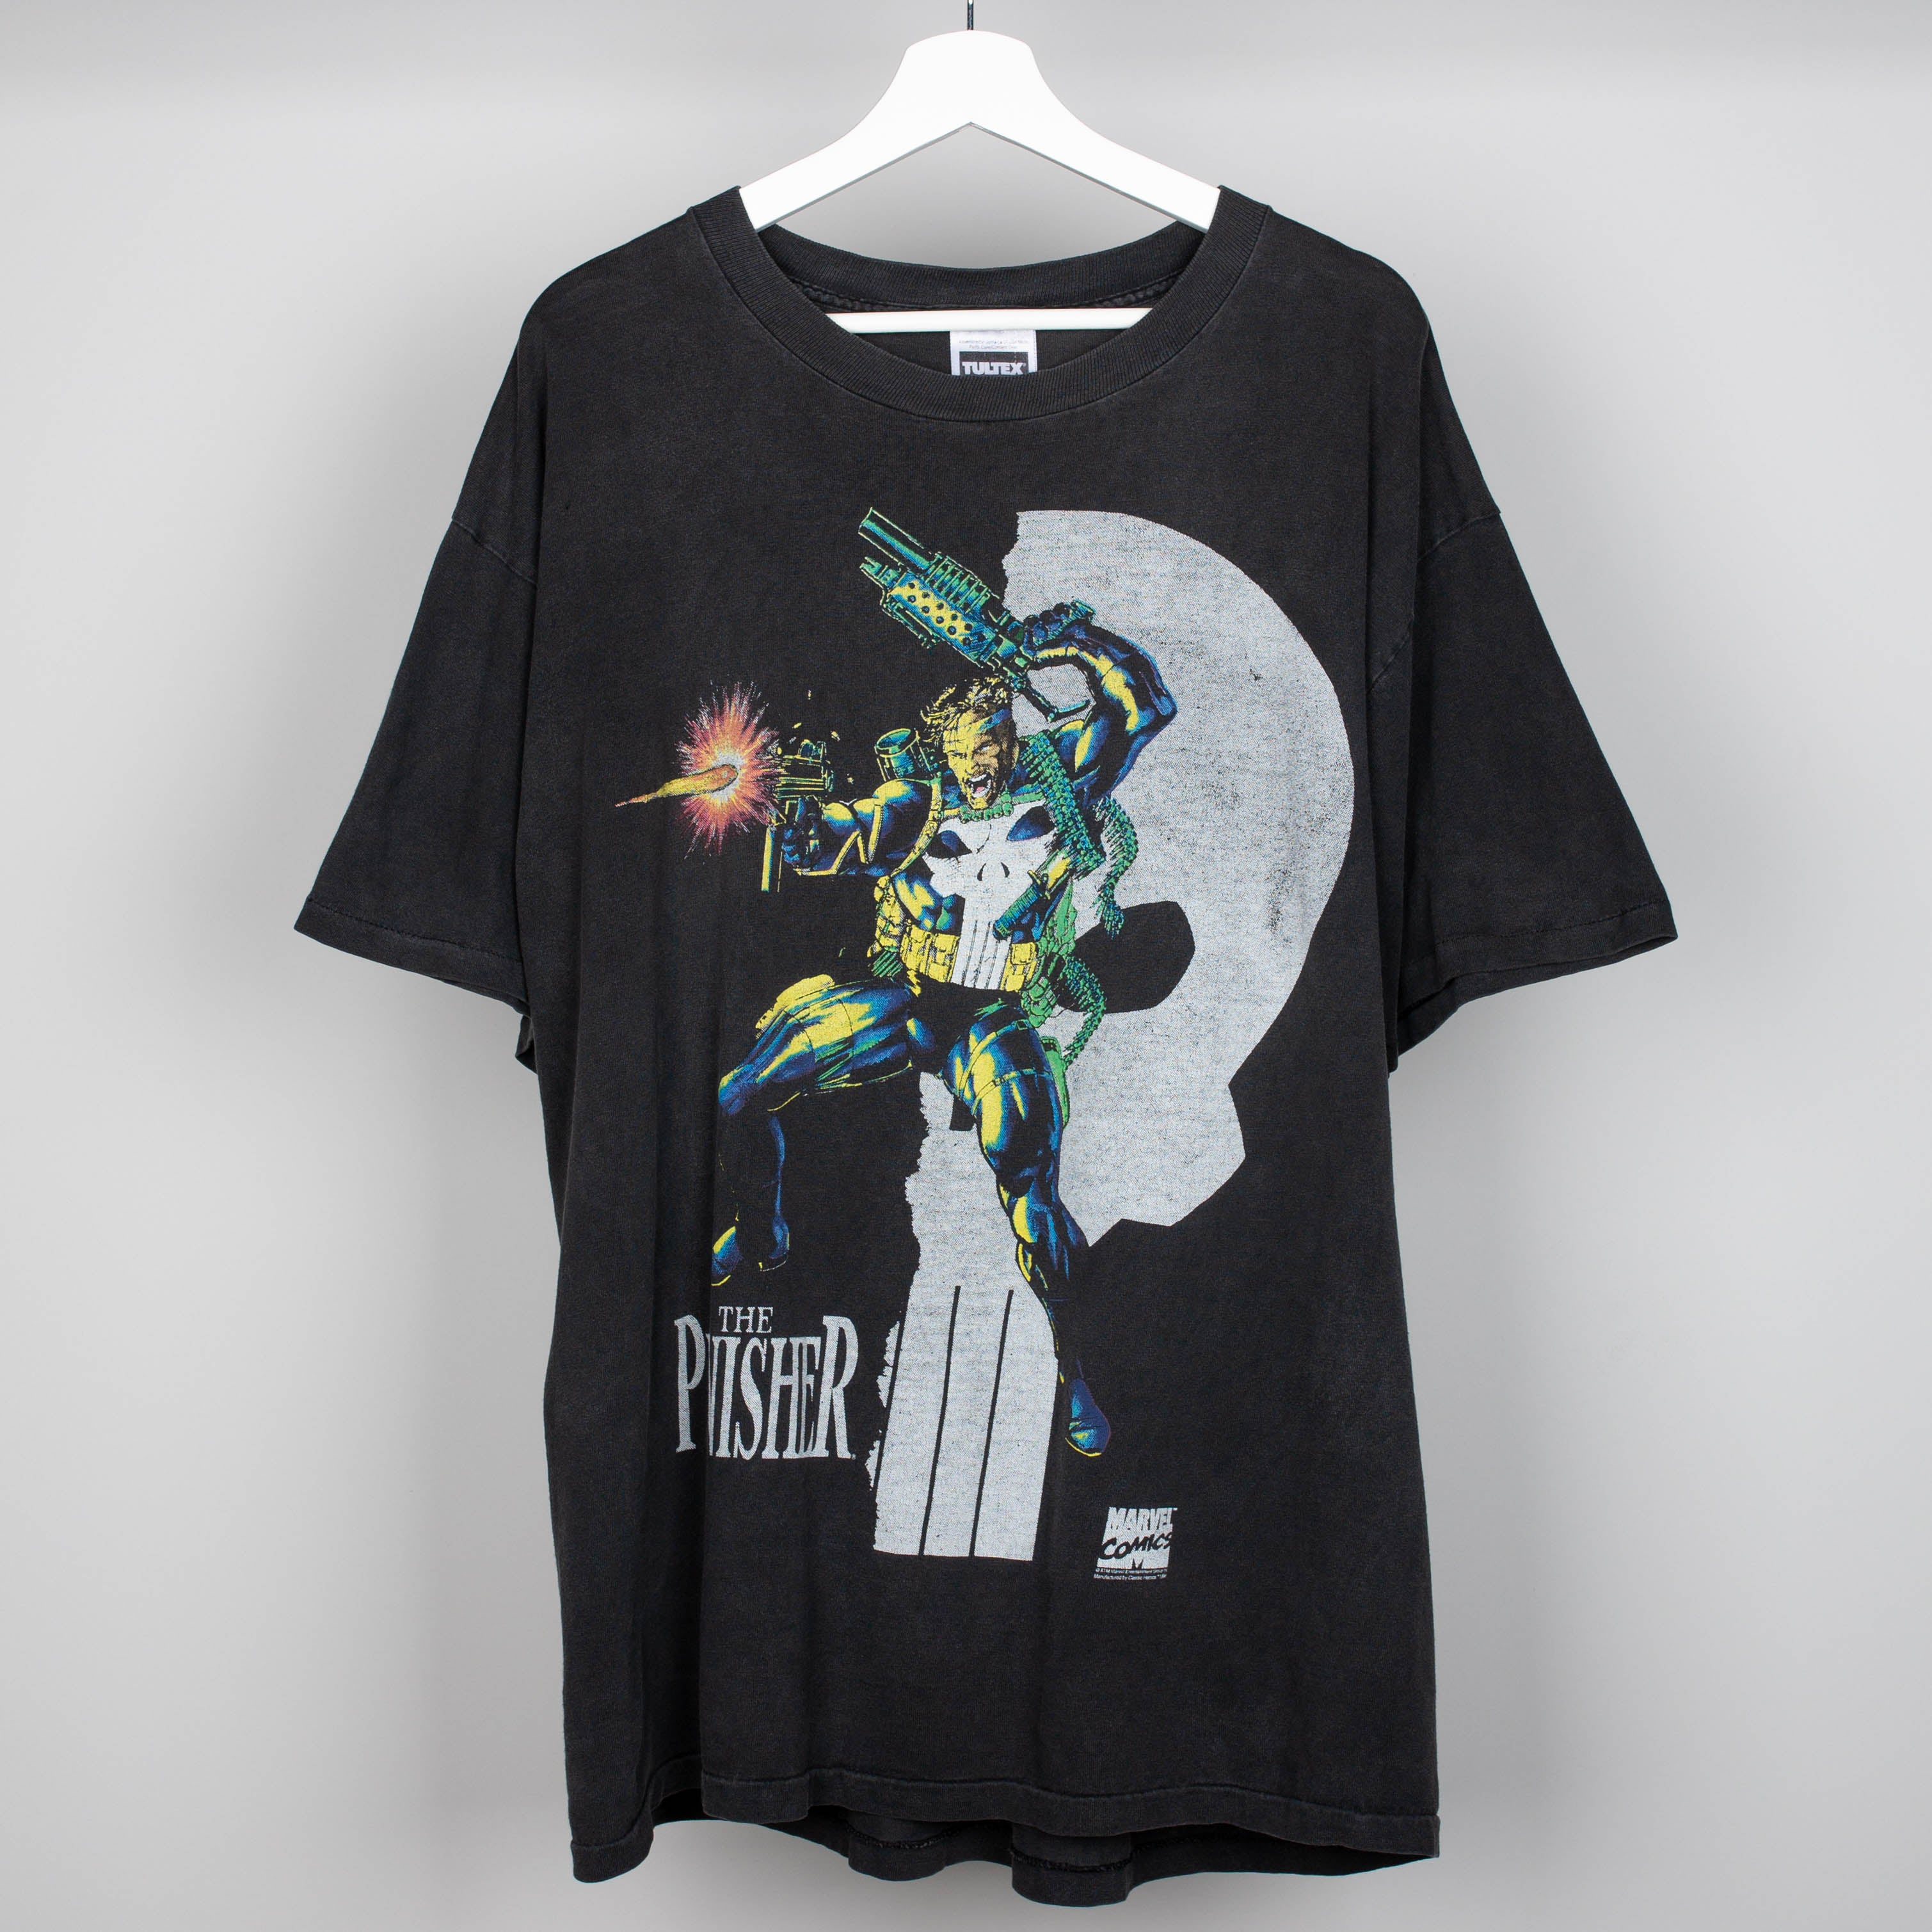 1994 The punisher Marvel Comics Threaded – XL T-Shirt Size Grails